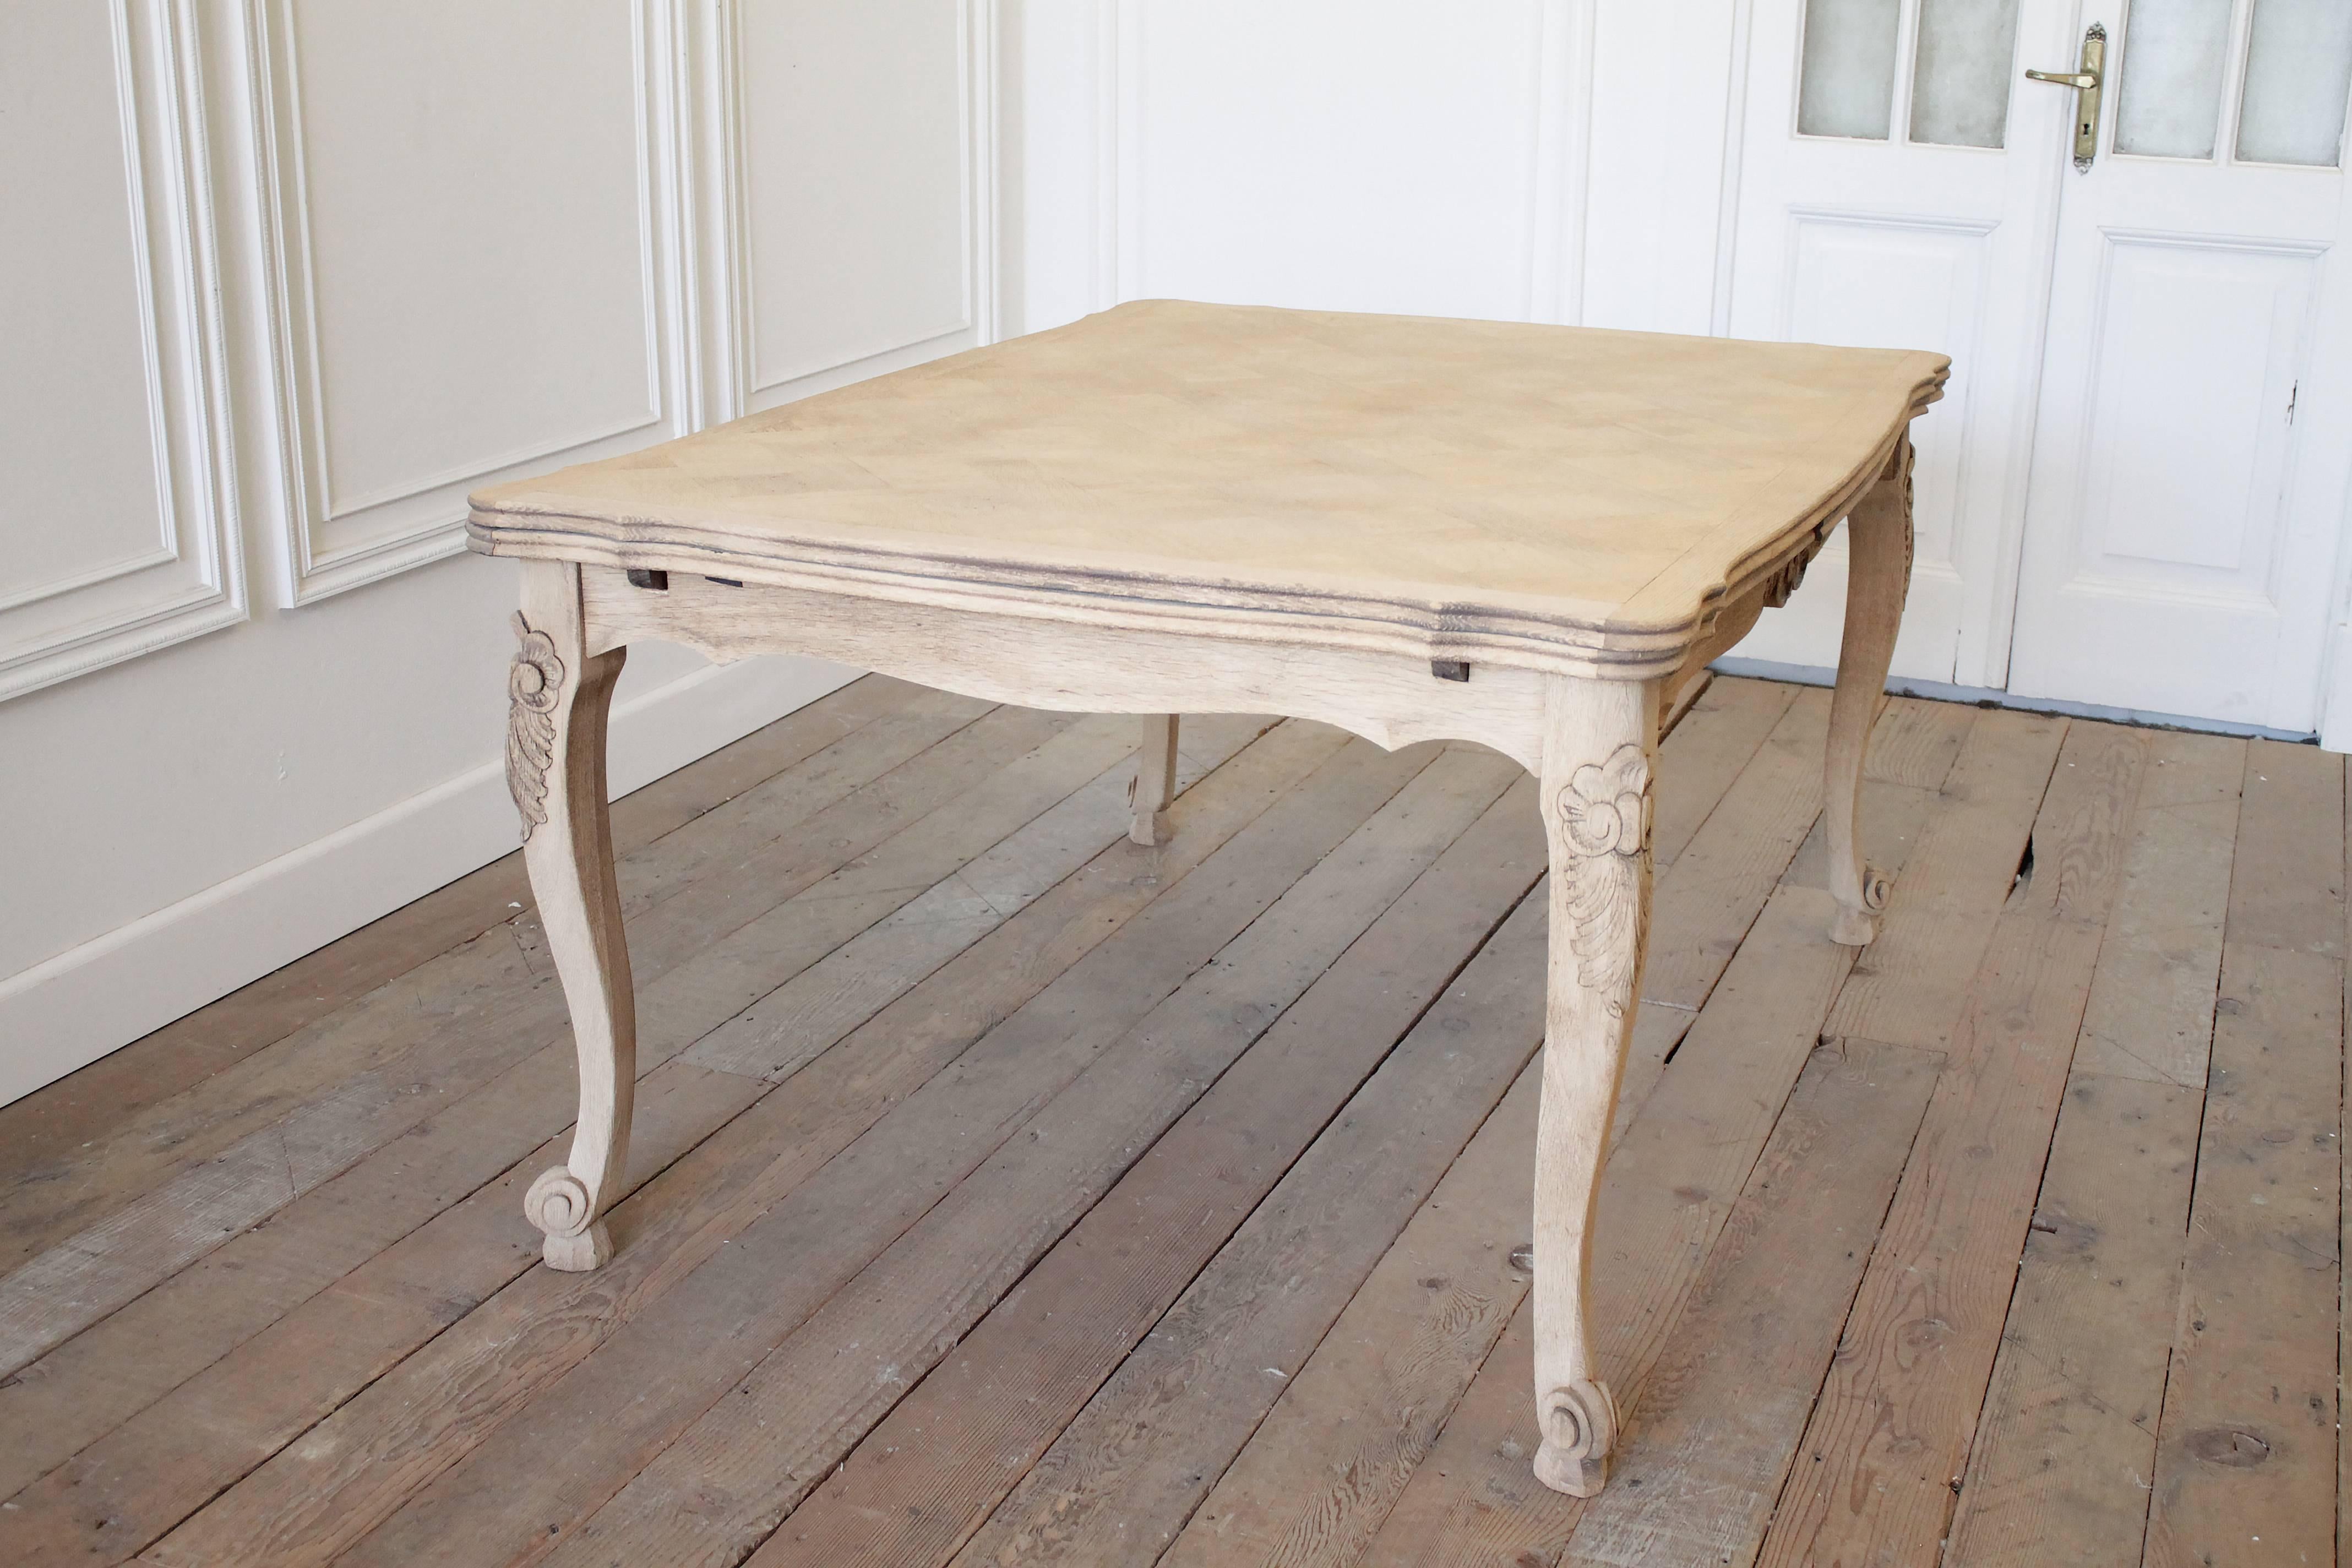 French draw-leaf dining table with a carefully stripped parquet top and painted base. The leaves can be easily drawn out without damaging the finish. Large carved leaf and clam shell design on four legs and apron. 

The table fully extended is